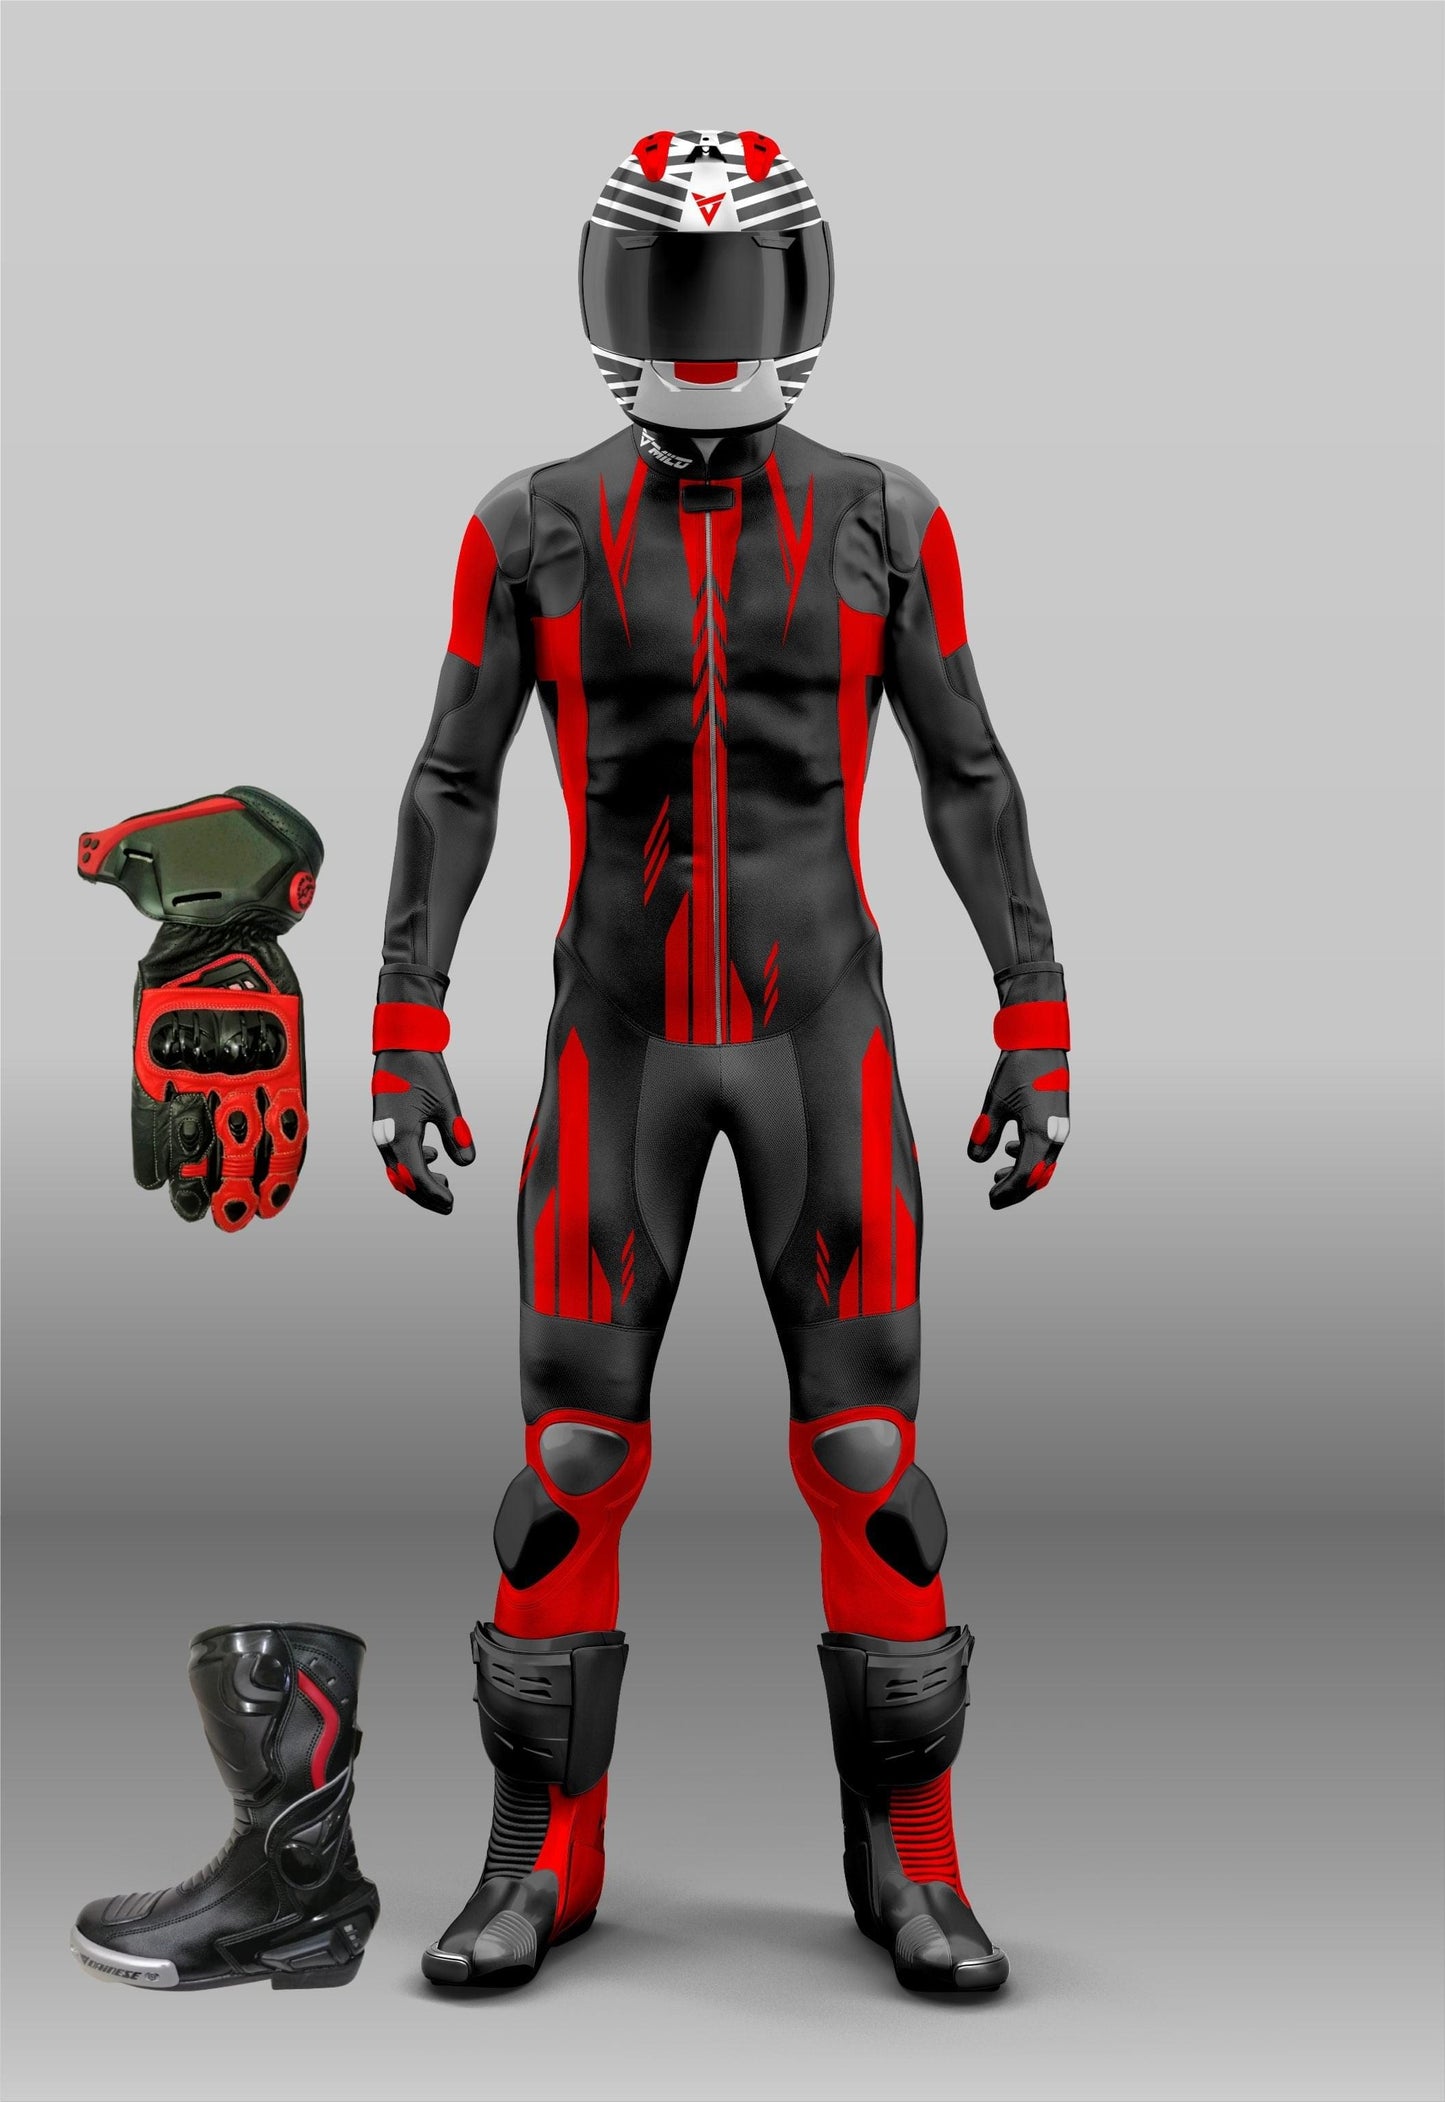 Customize Your Full Racing Kit - Leather Riding / Racing Suit, Boots & Gloves - Unisex 